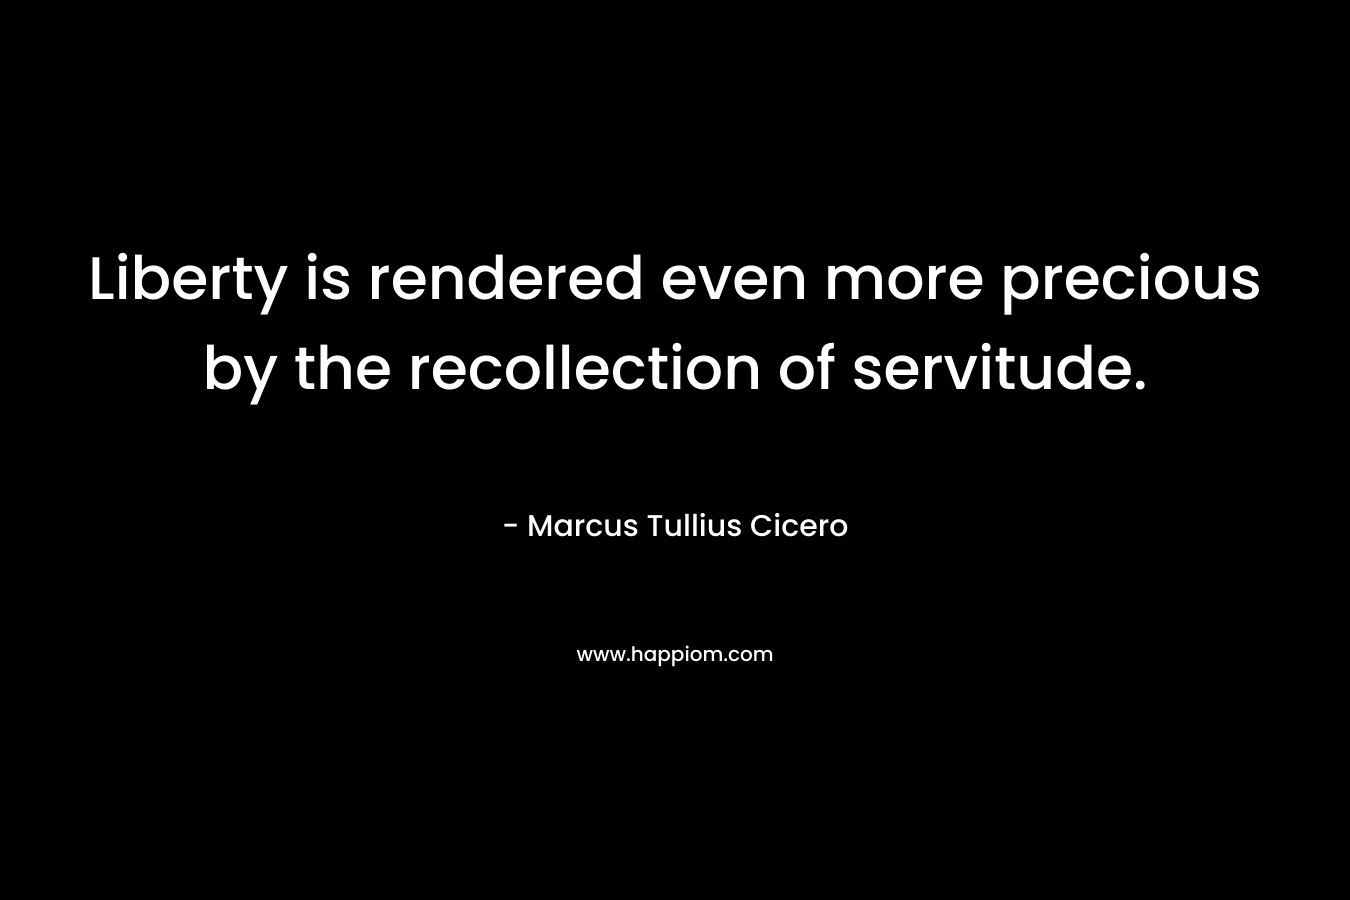 Liberty is rendered even more precious by the recollection of servitude. – Marcus Tullius Cicero